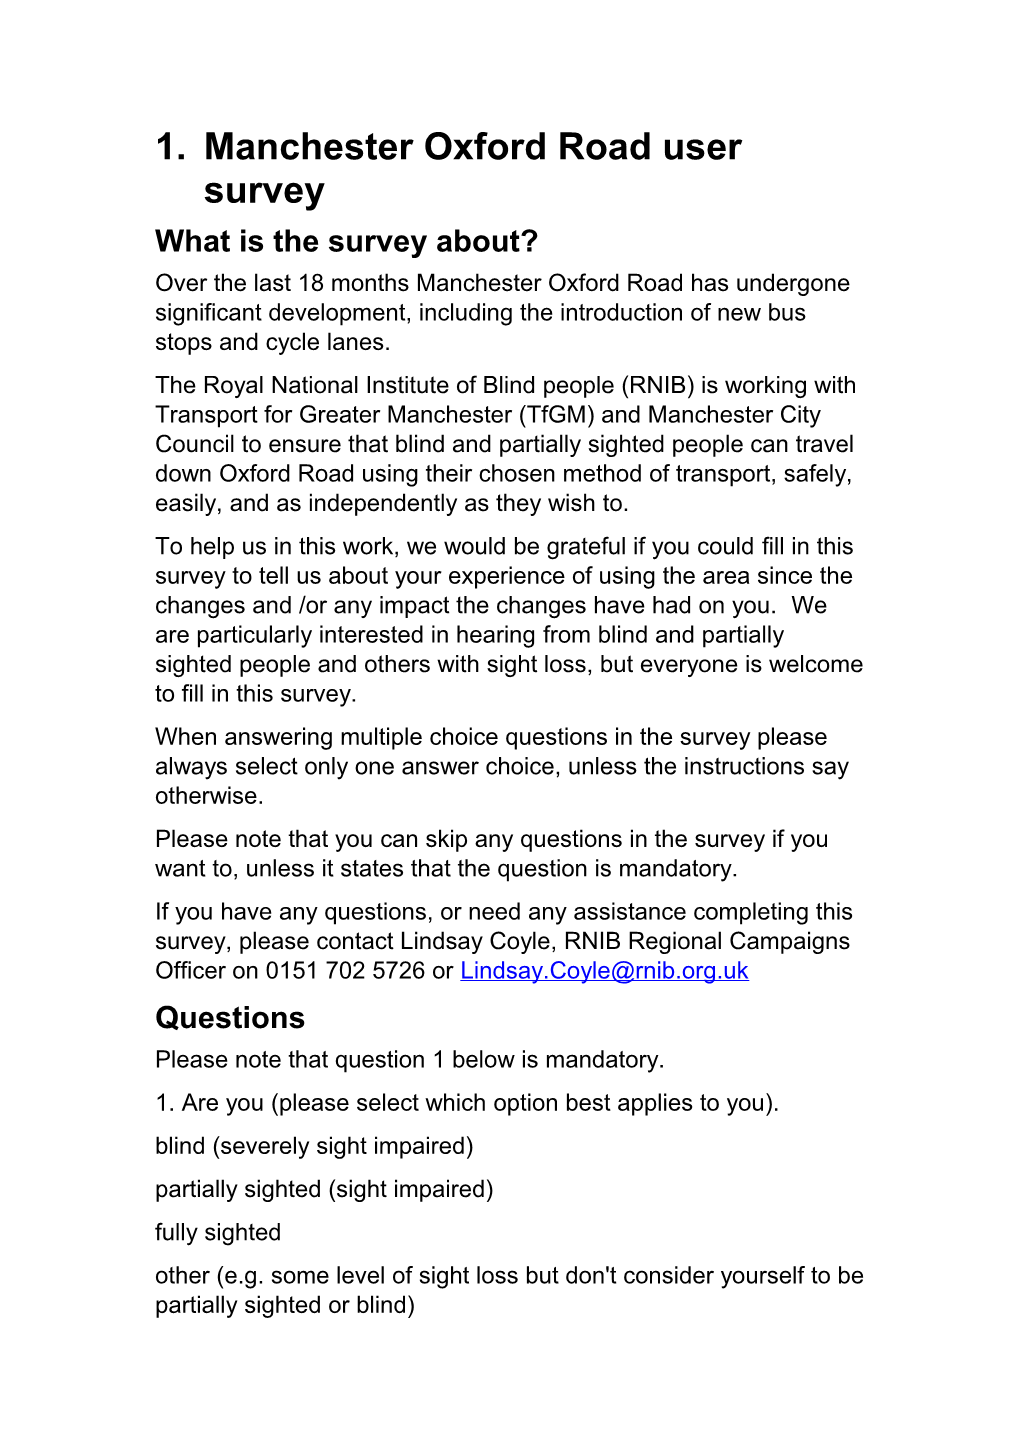 Manchester Oxford Road User Survey